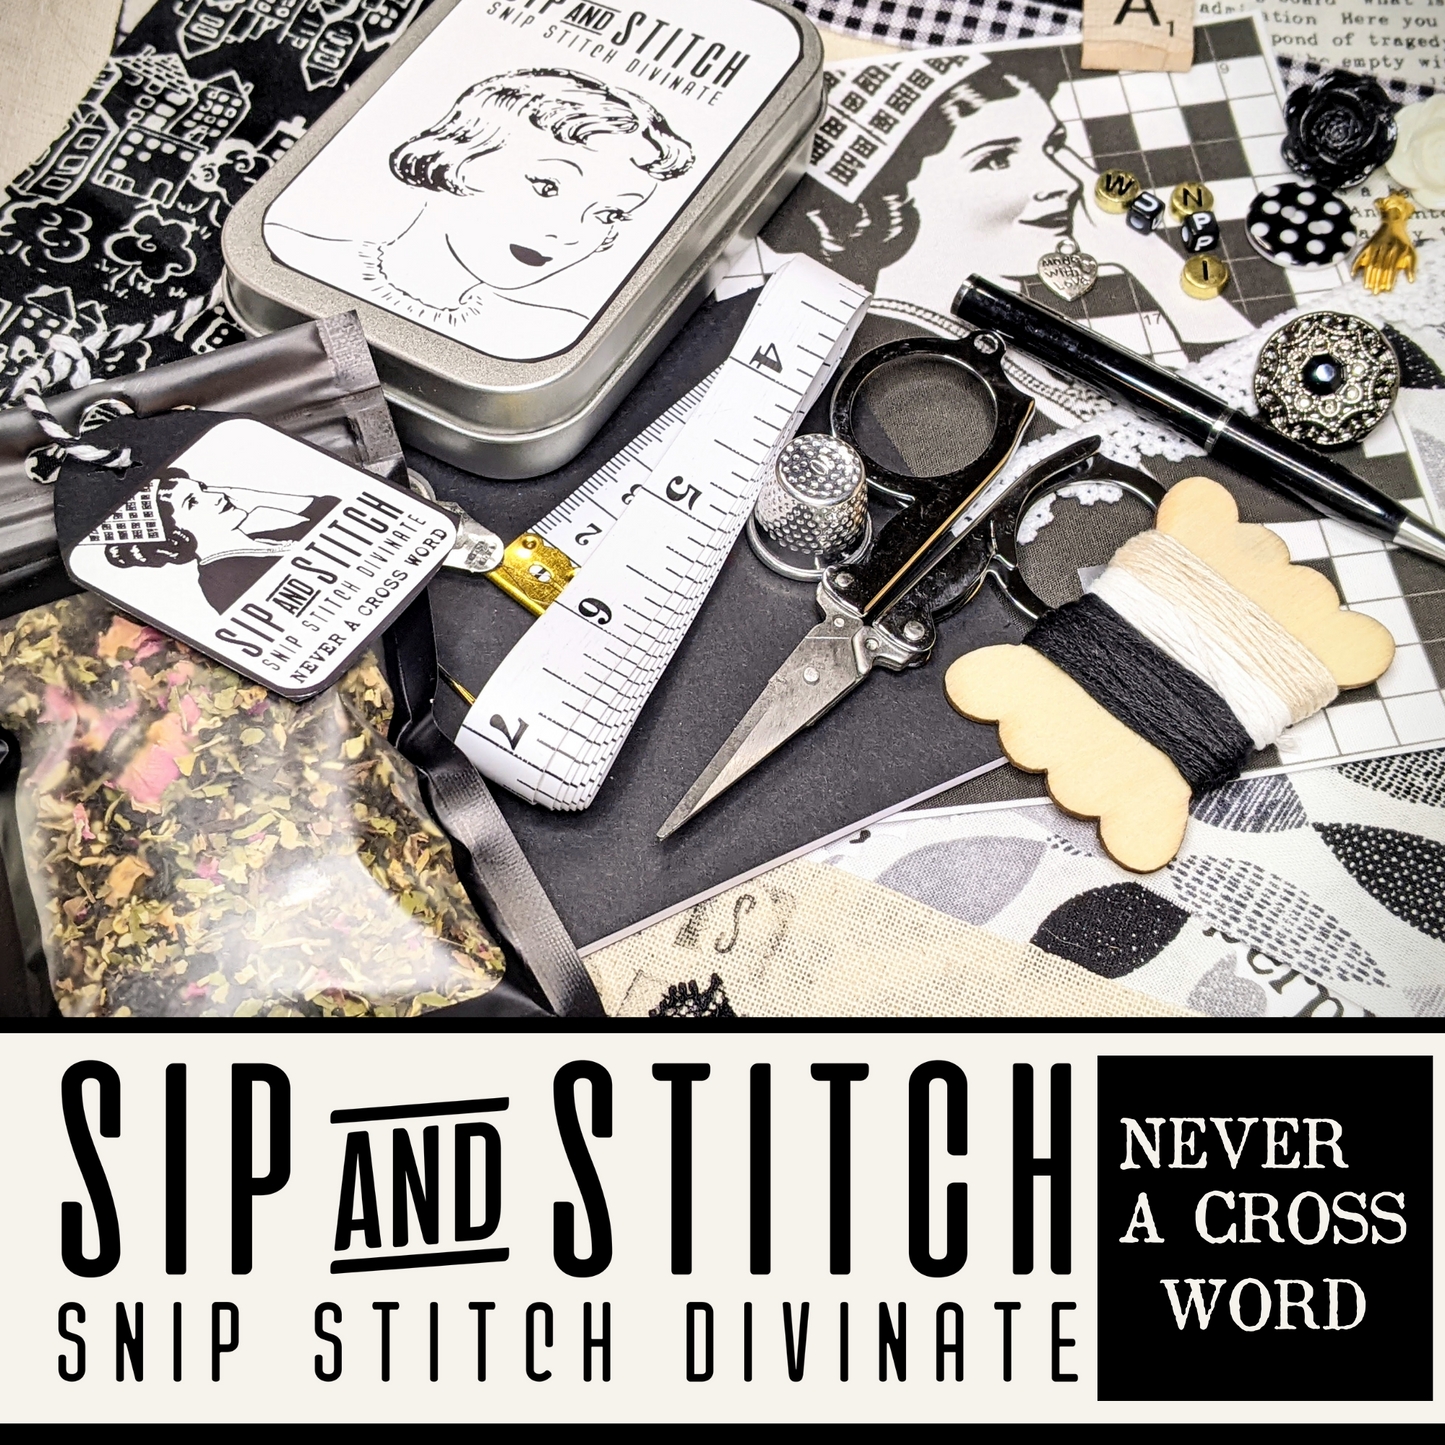 Sip & Stitch Collage Kit: Never A Cross Word | Slow Stitch Inspiration Tea Kit | (Digital Designs/Fabric/Buttons/Lace/Herbal Tea +)